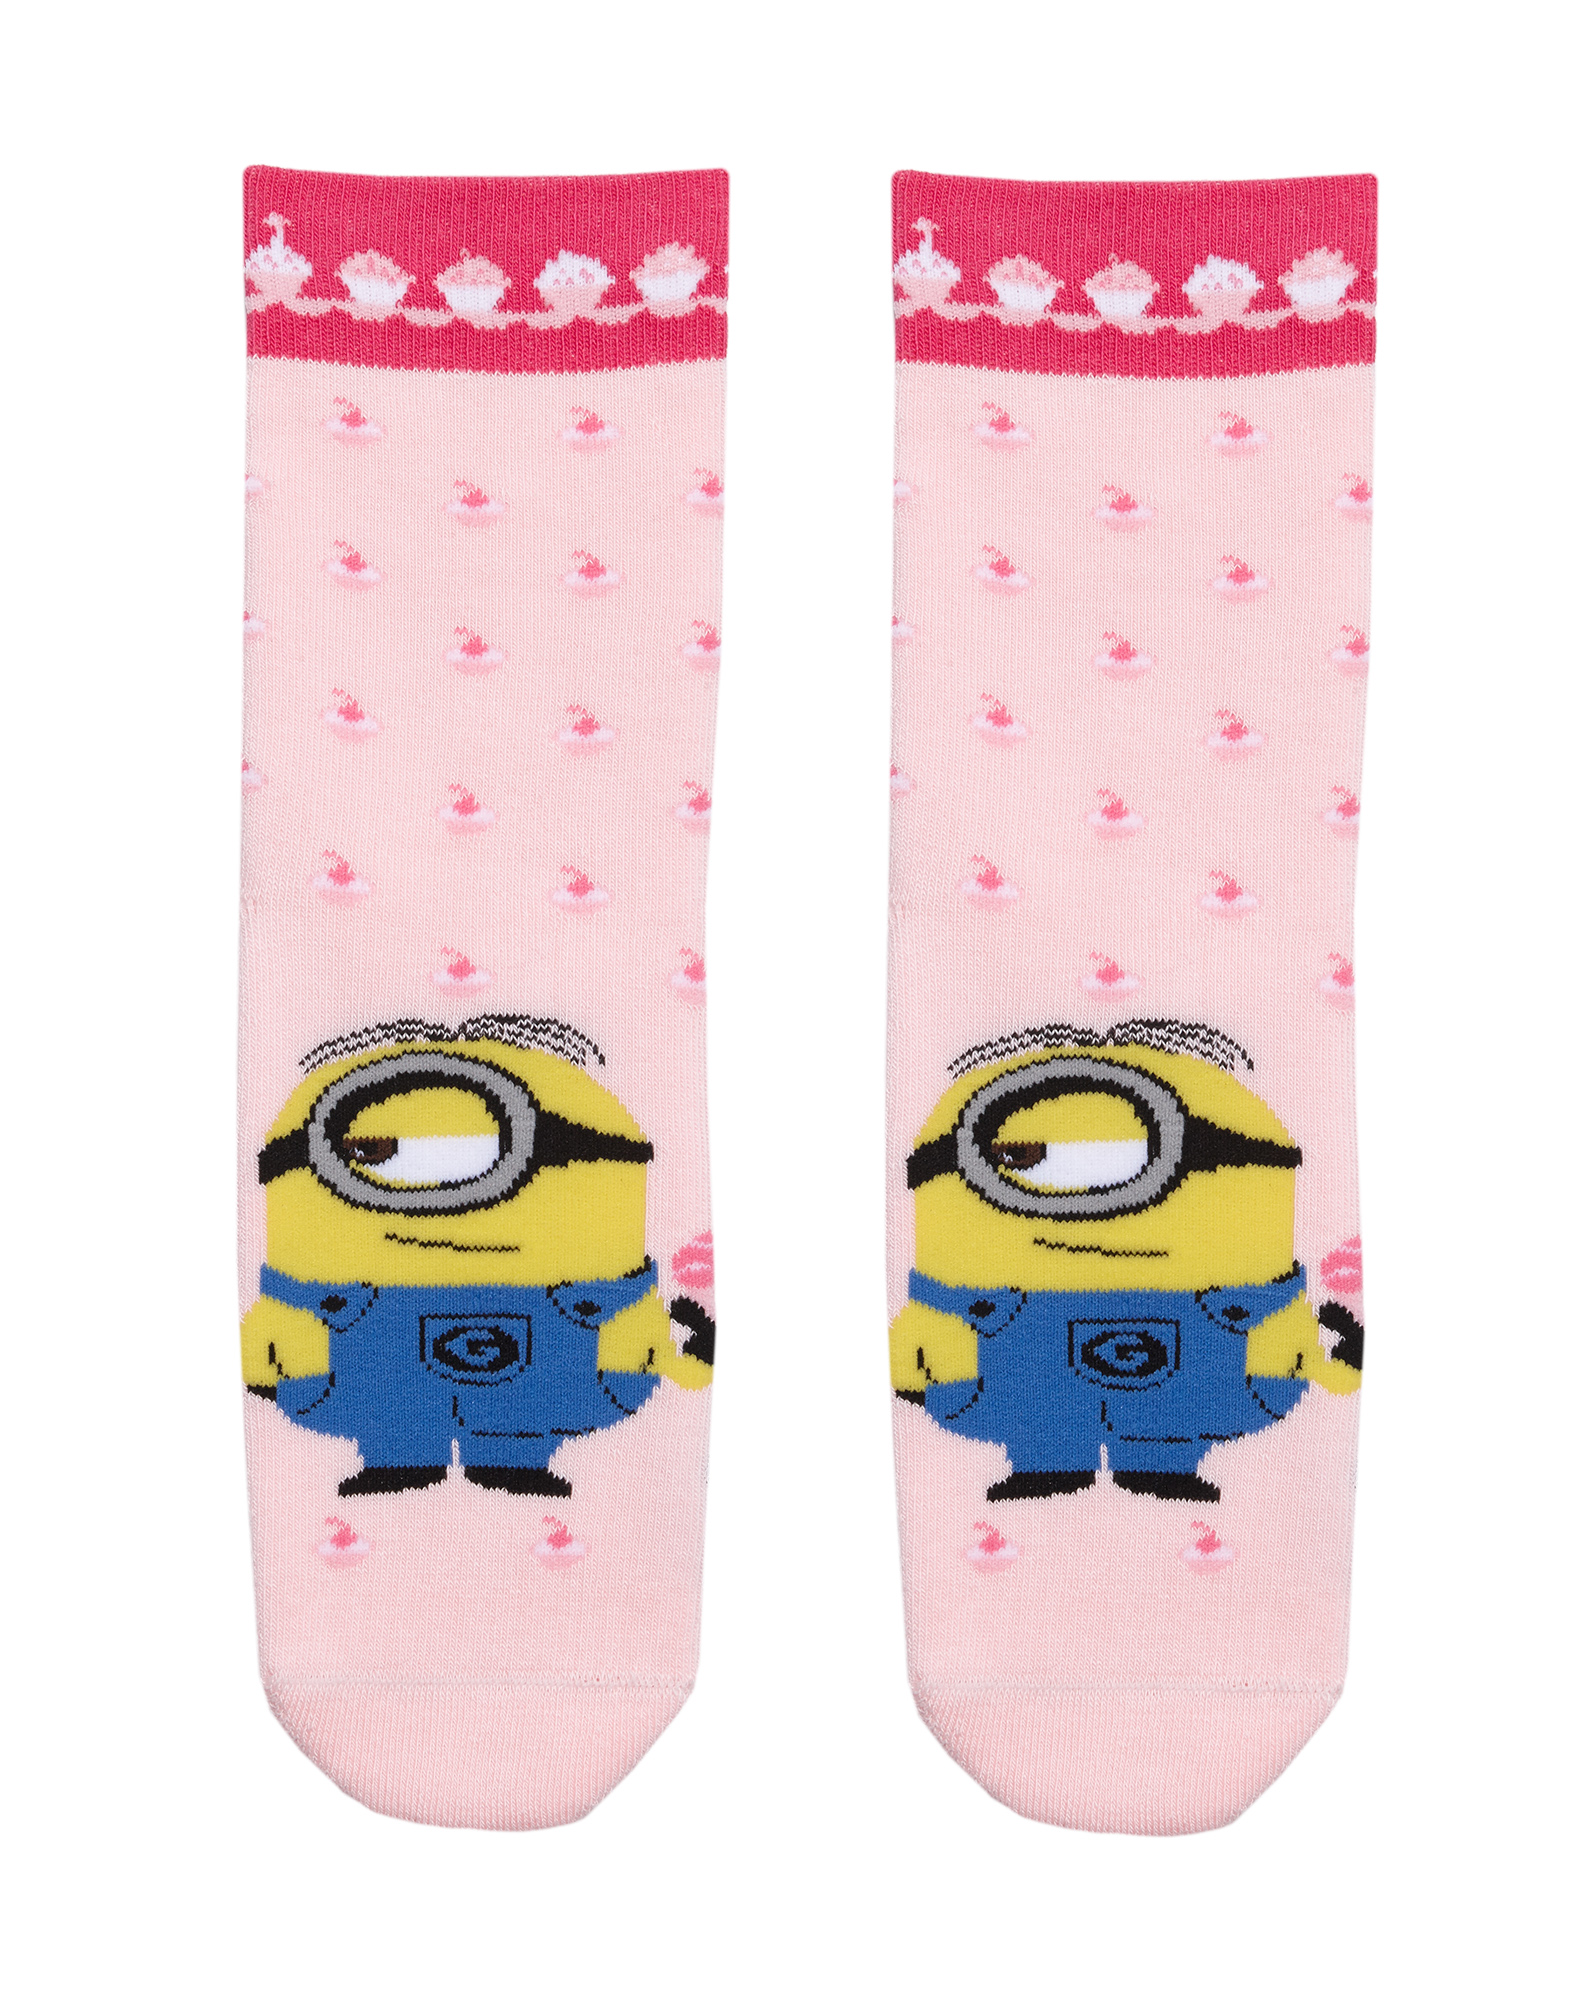 Calzedonia capsule collection "Speciale Minions"